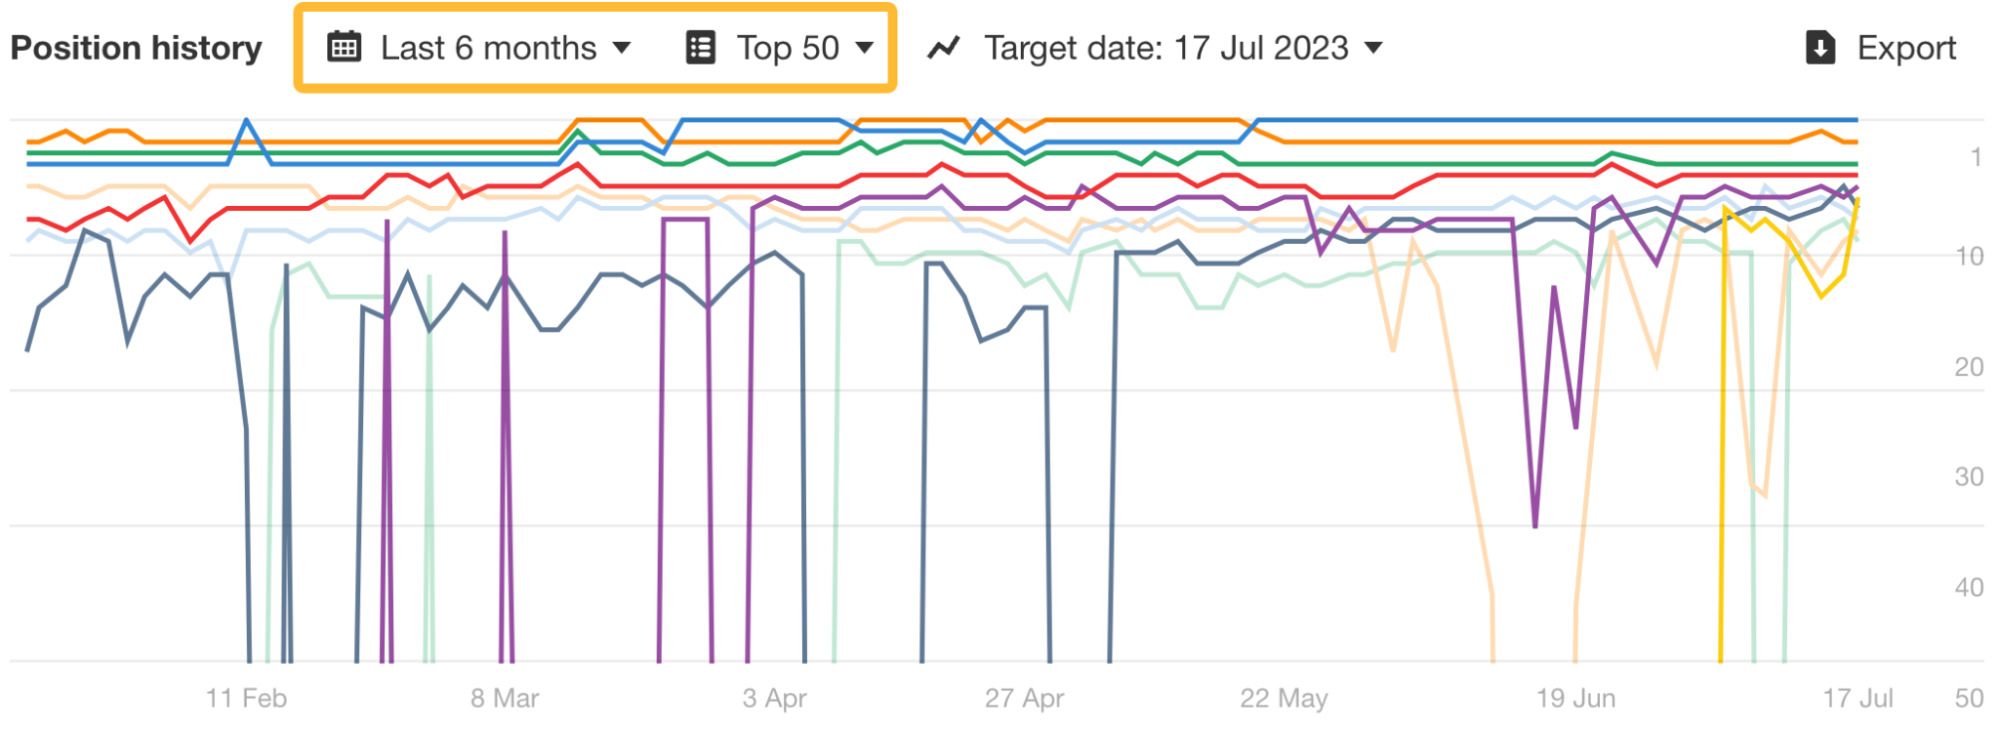 SERP position history graph in Ahrefs